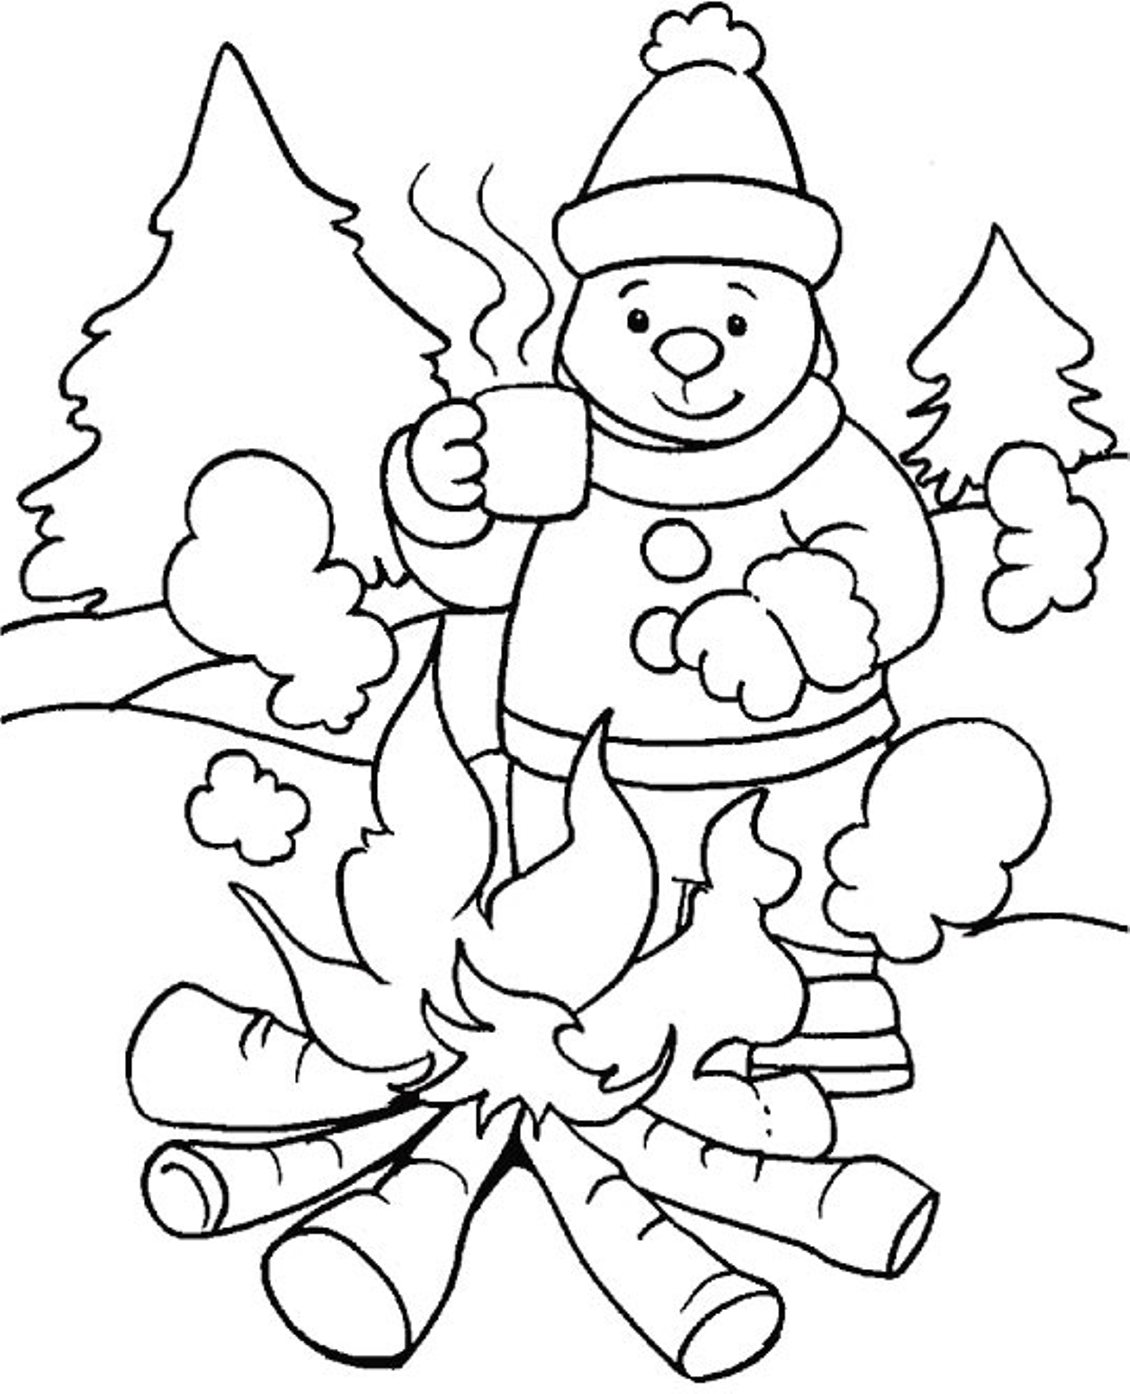 194 Cute Winter Season Coloring Pages For Toddlers with disney character